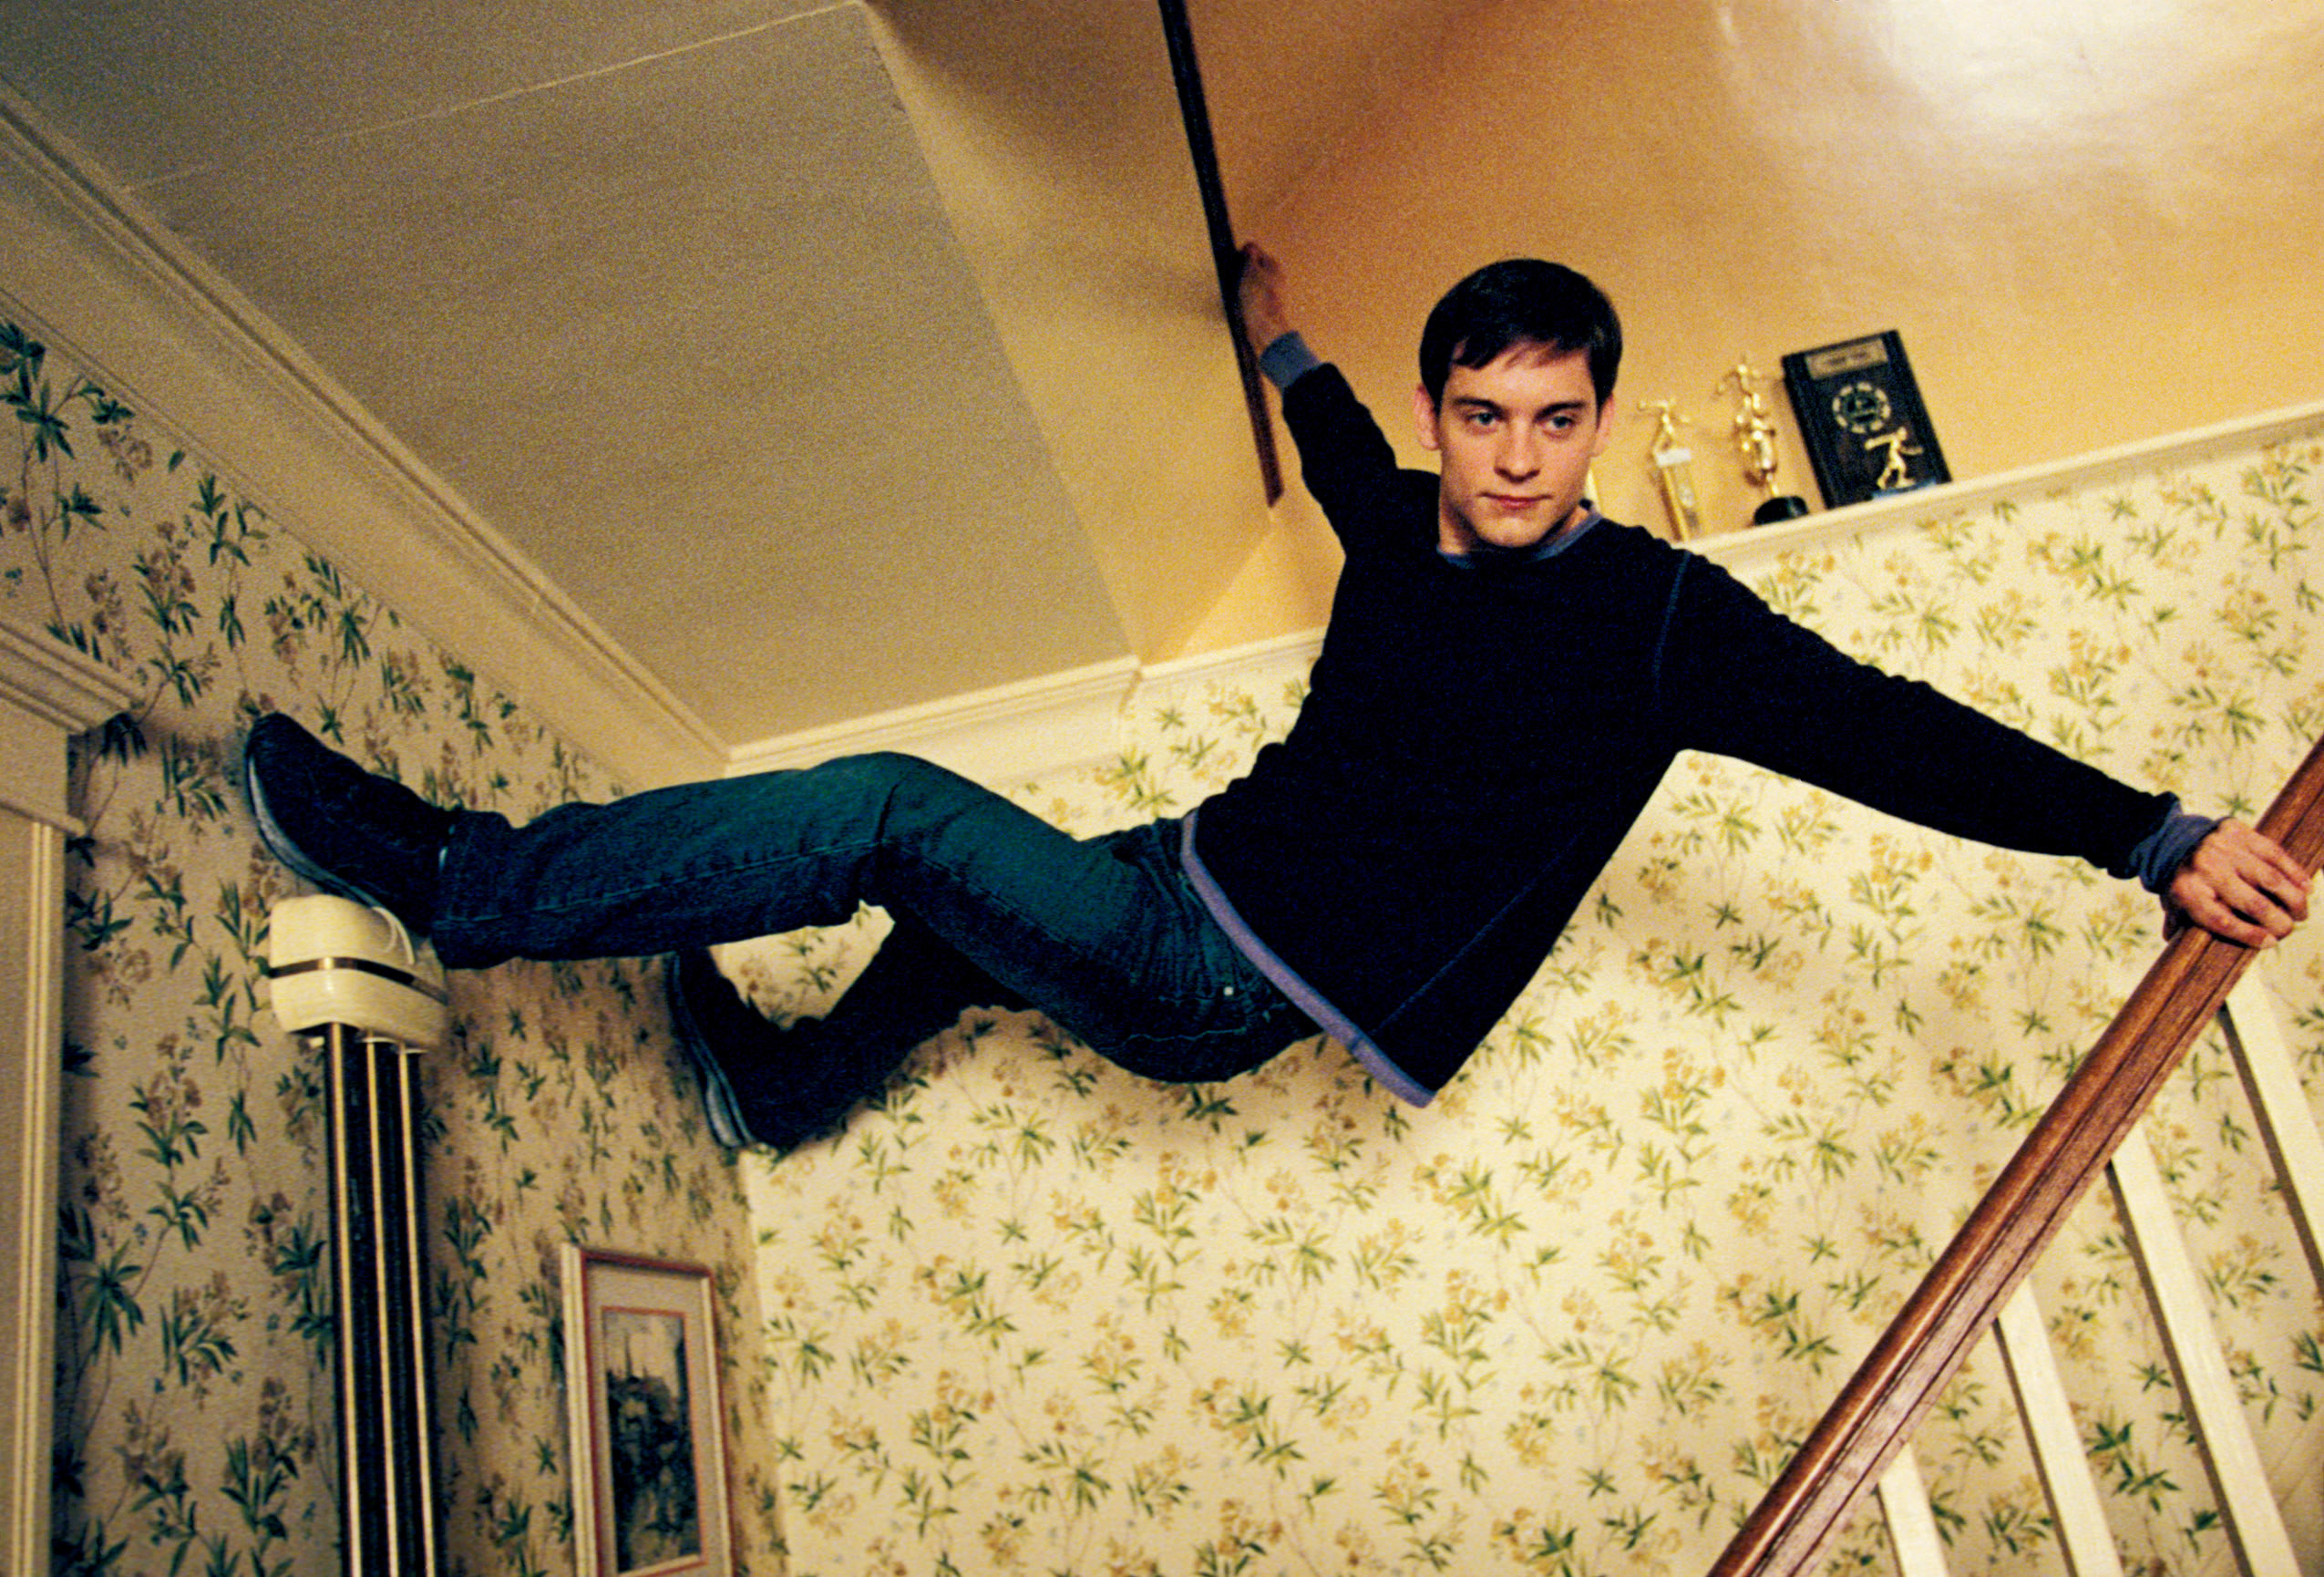 Peter Parker attached to the ceiling of his house